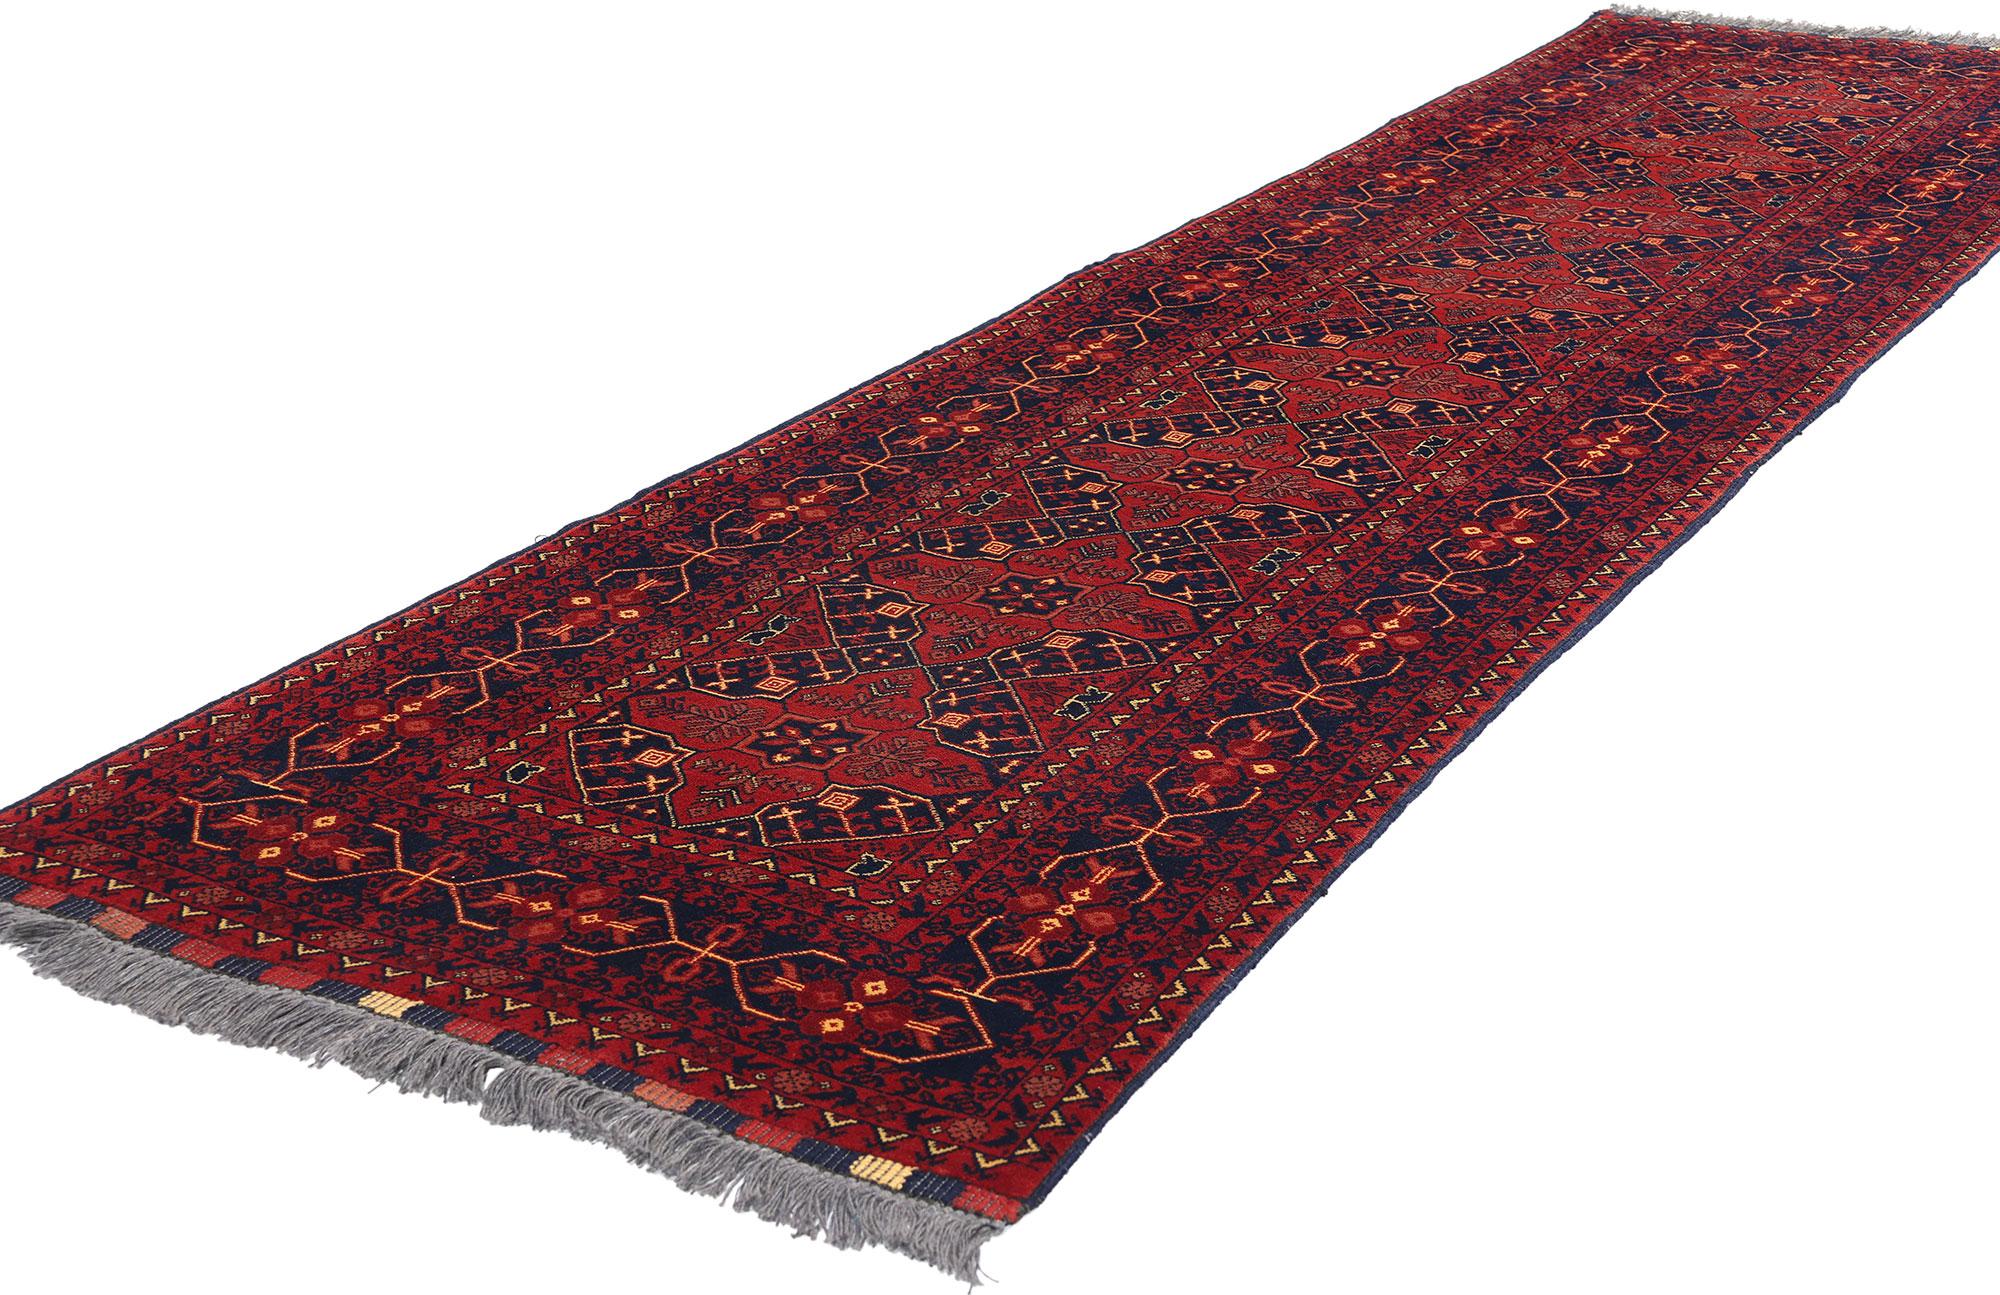 77009 Vintage Afghan Baluch Rug, 02'07 x 09'08. Afghan Baluch rugs are handwoven textiles originating from the Baluch tribes in Afghanistan. These rugs are characterized by intricate designs, geometric patterns, and earthy colors such as red, blue,